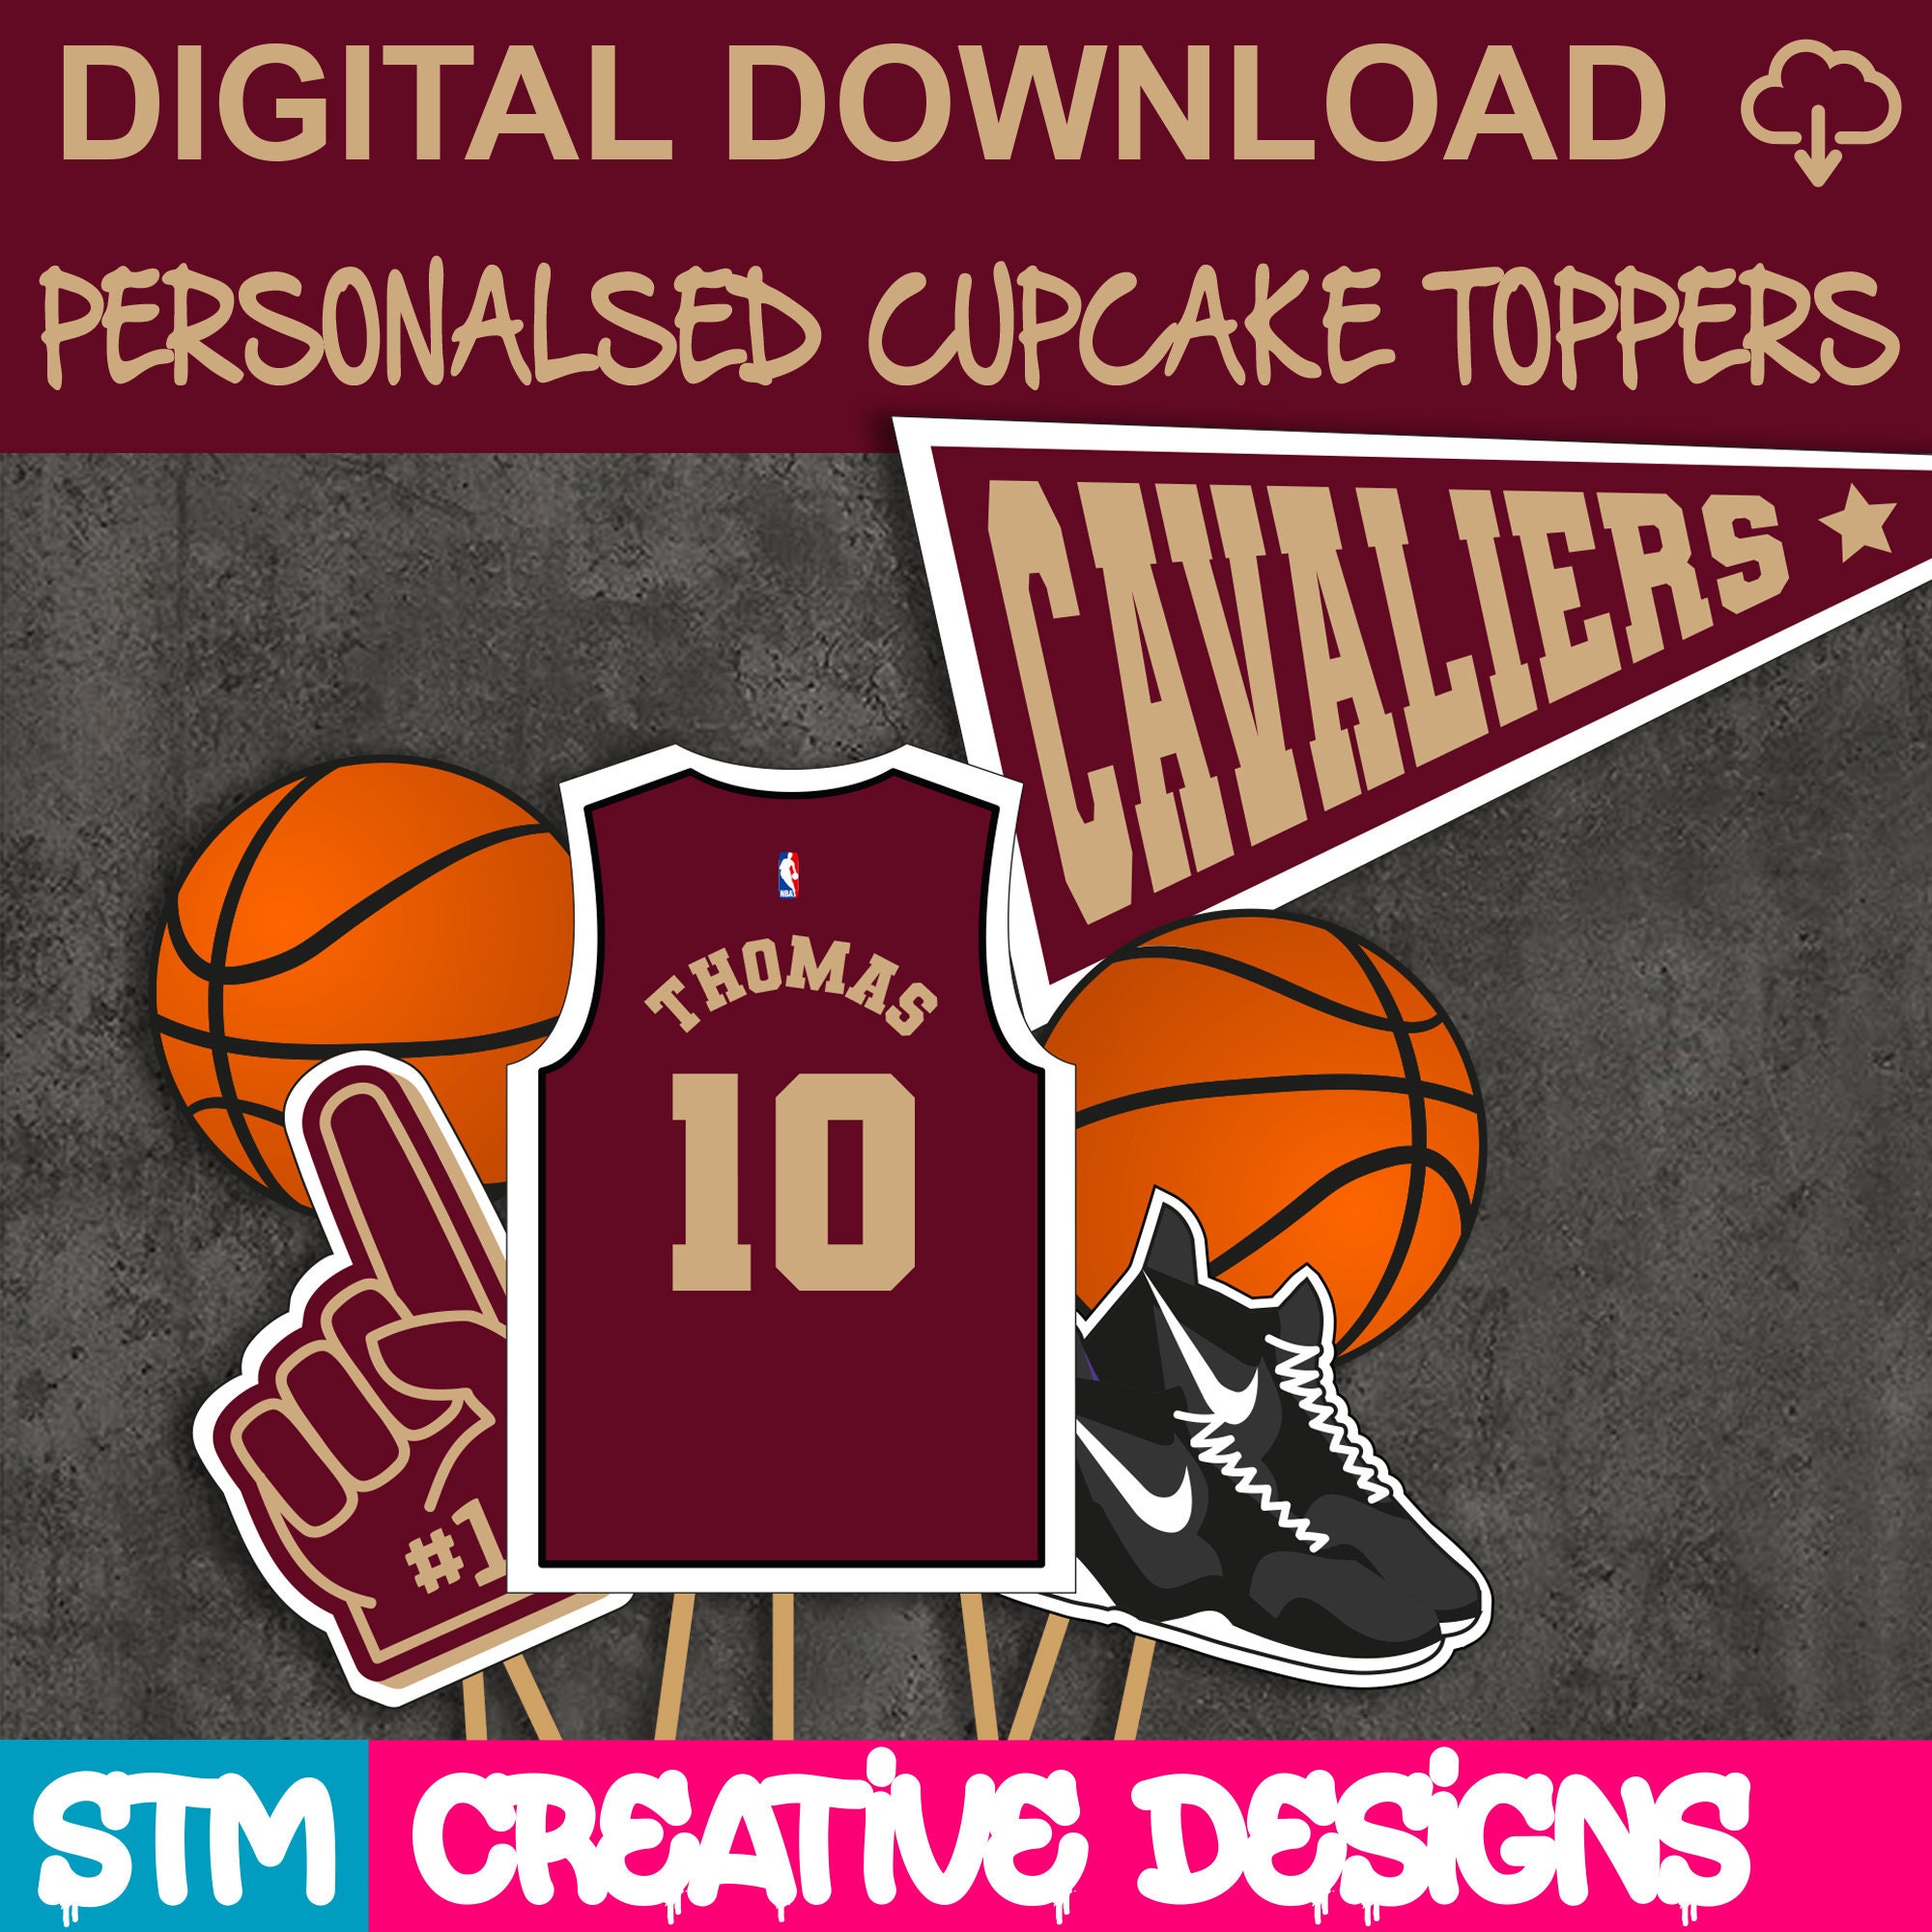 Cleveland Cavaliers Cupcake Toppers, Assorted Double Sided – Sports Invites